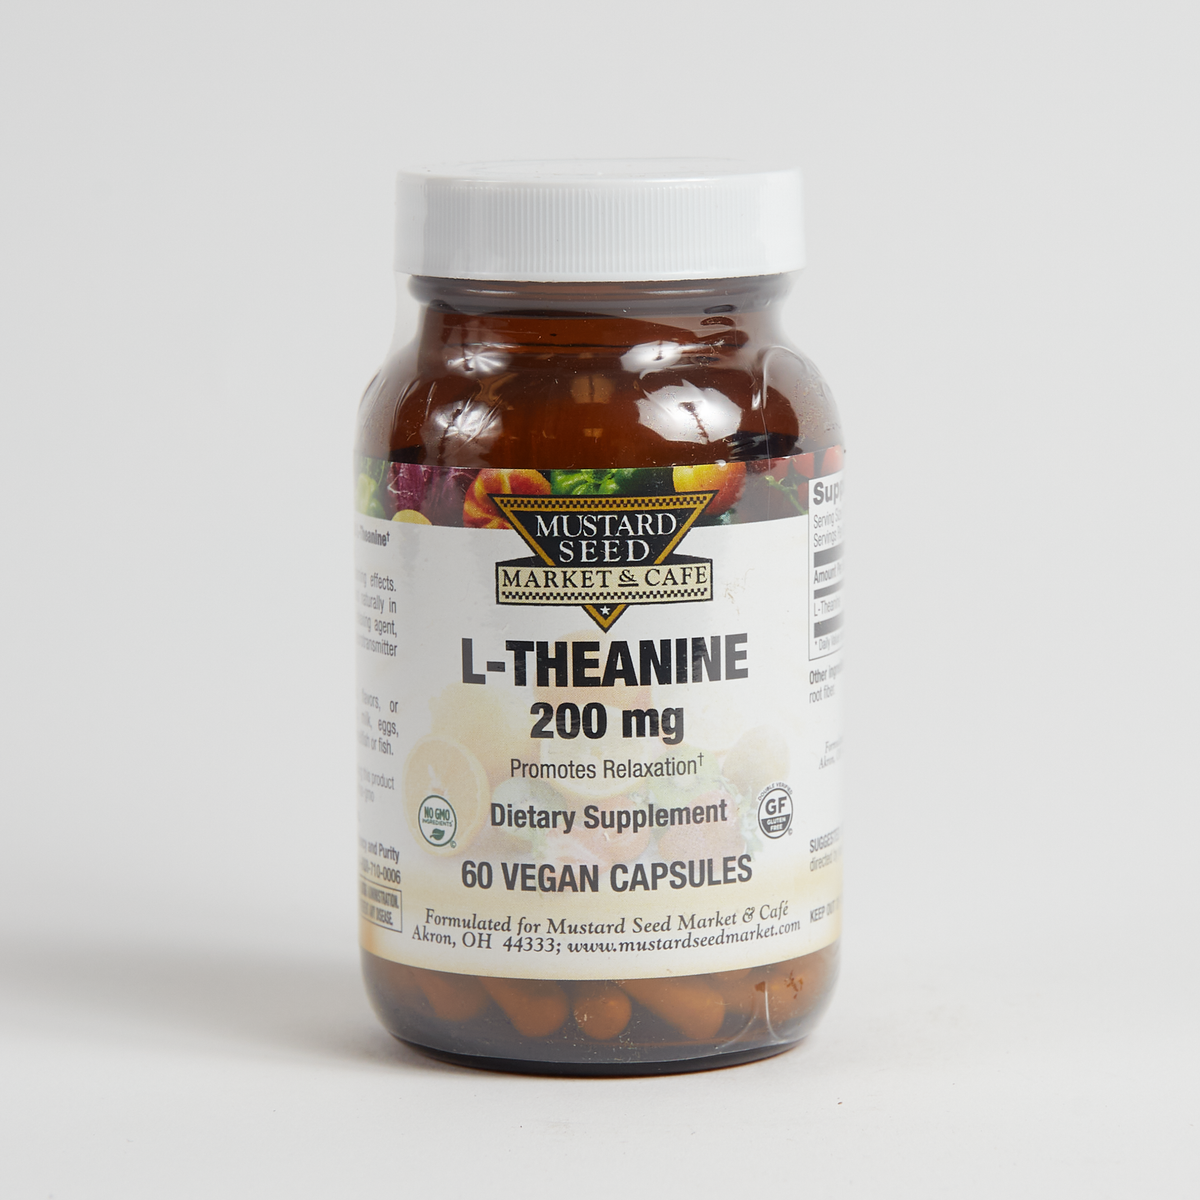 Mustard Seed Market L-Theanine 200 IU - 60 Count